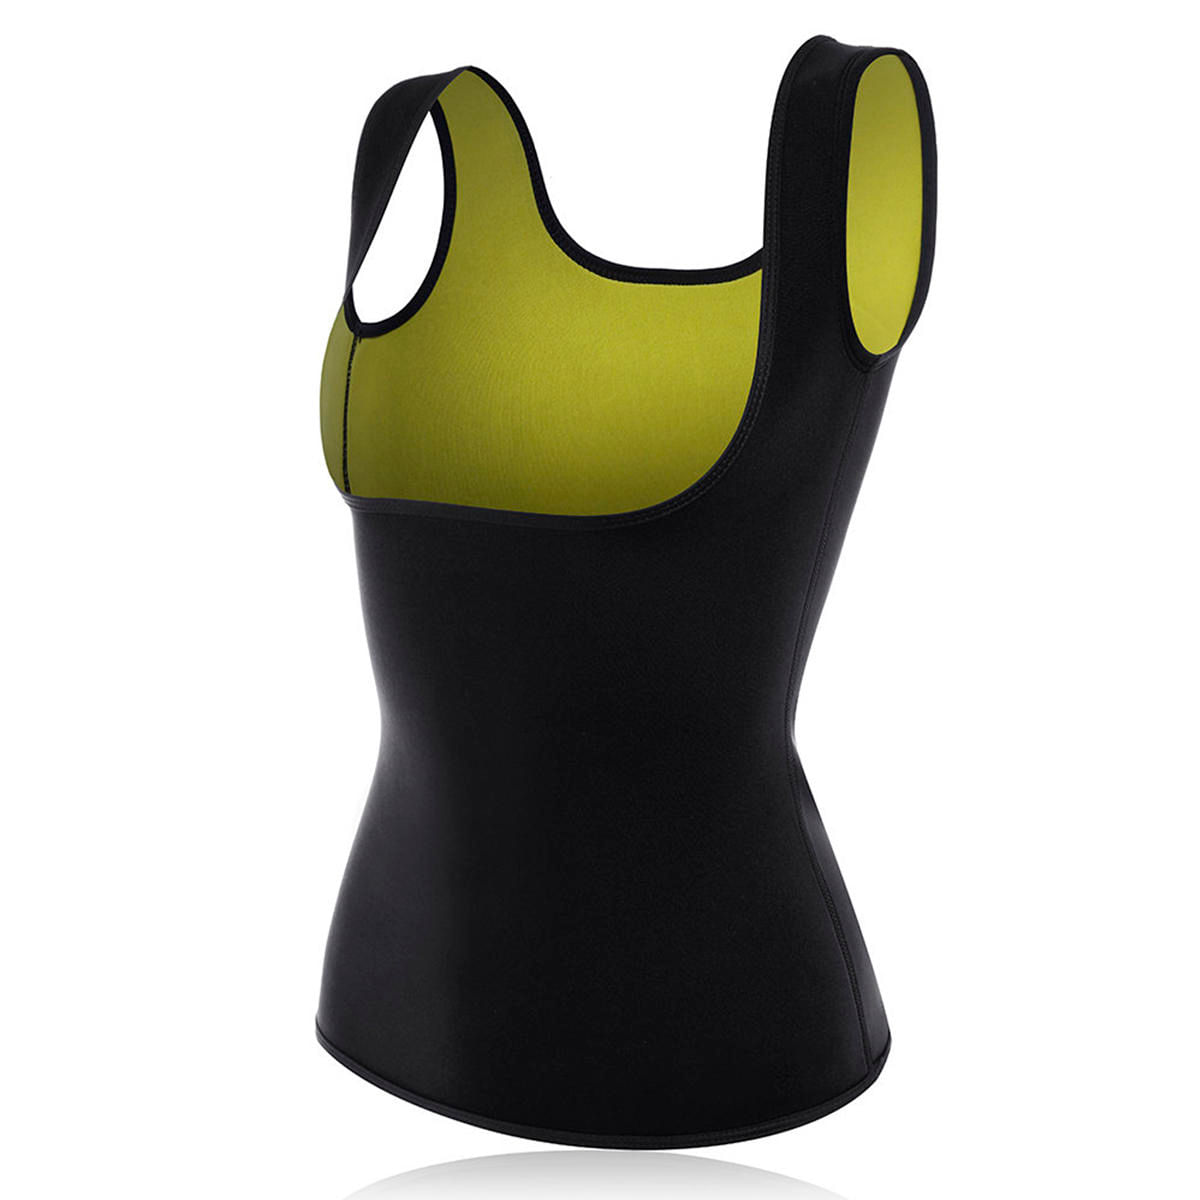 Chaleco Tubular Thermo Shapers - REDUCE MEDIDAS MUY FACILMENTE Sport Fitness - XL